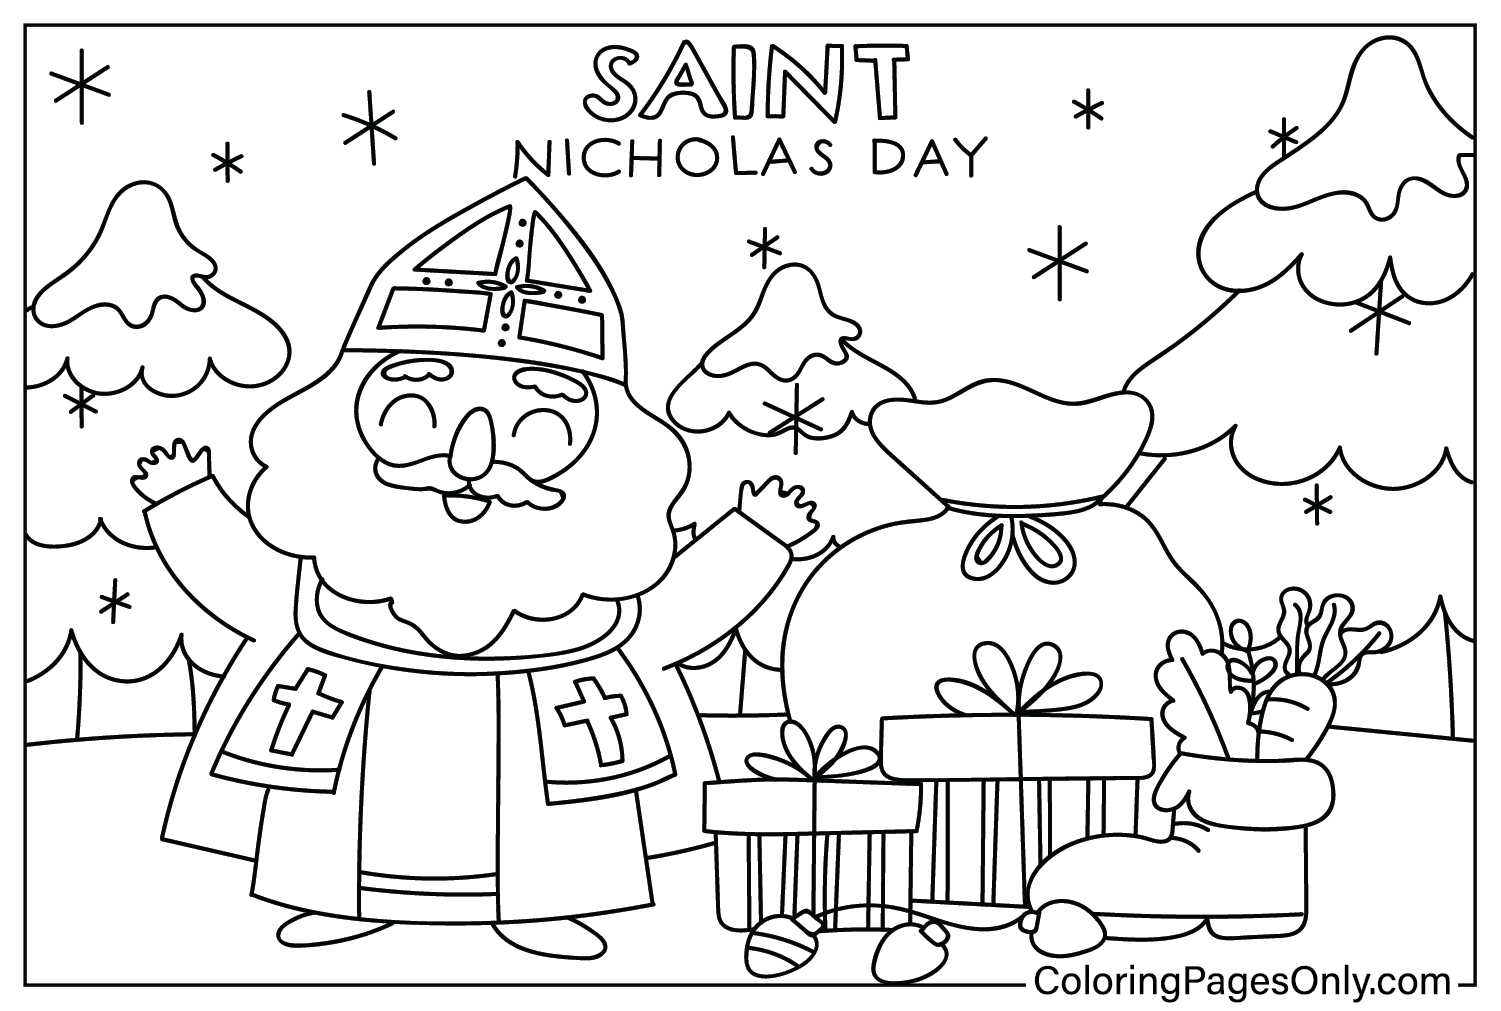 Saint Nicholas Day Coloring Page Free from Saint Nicholas Day